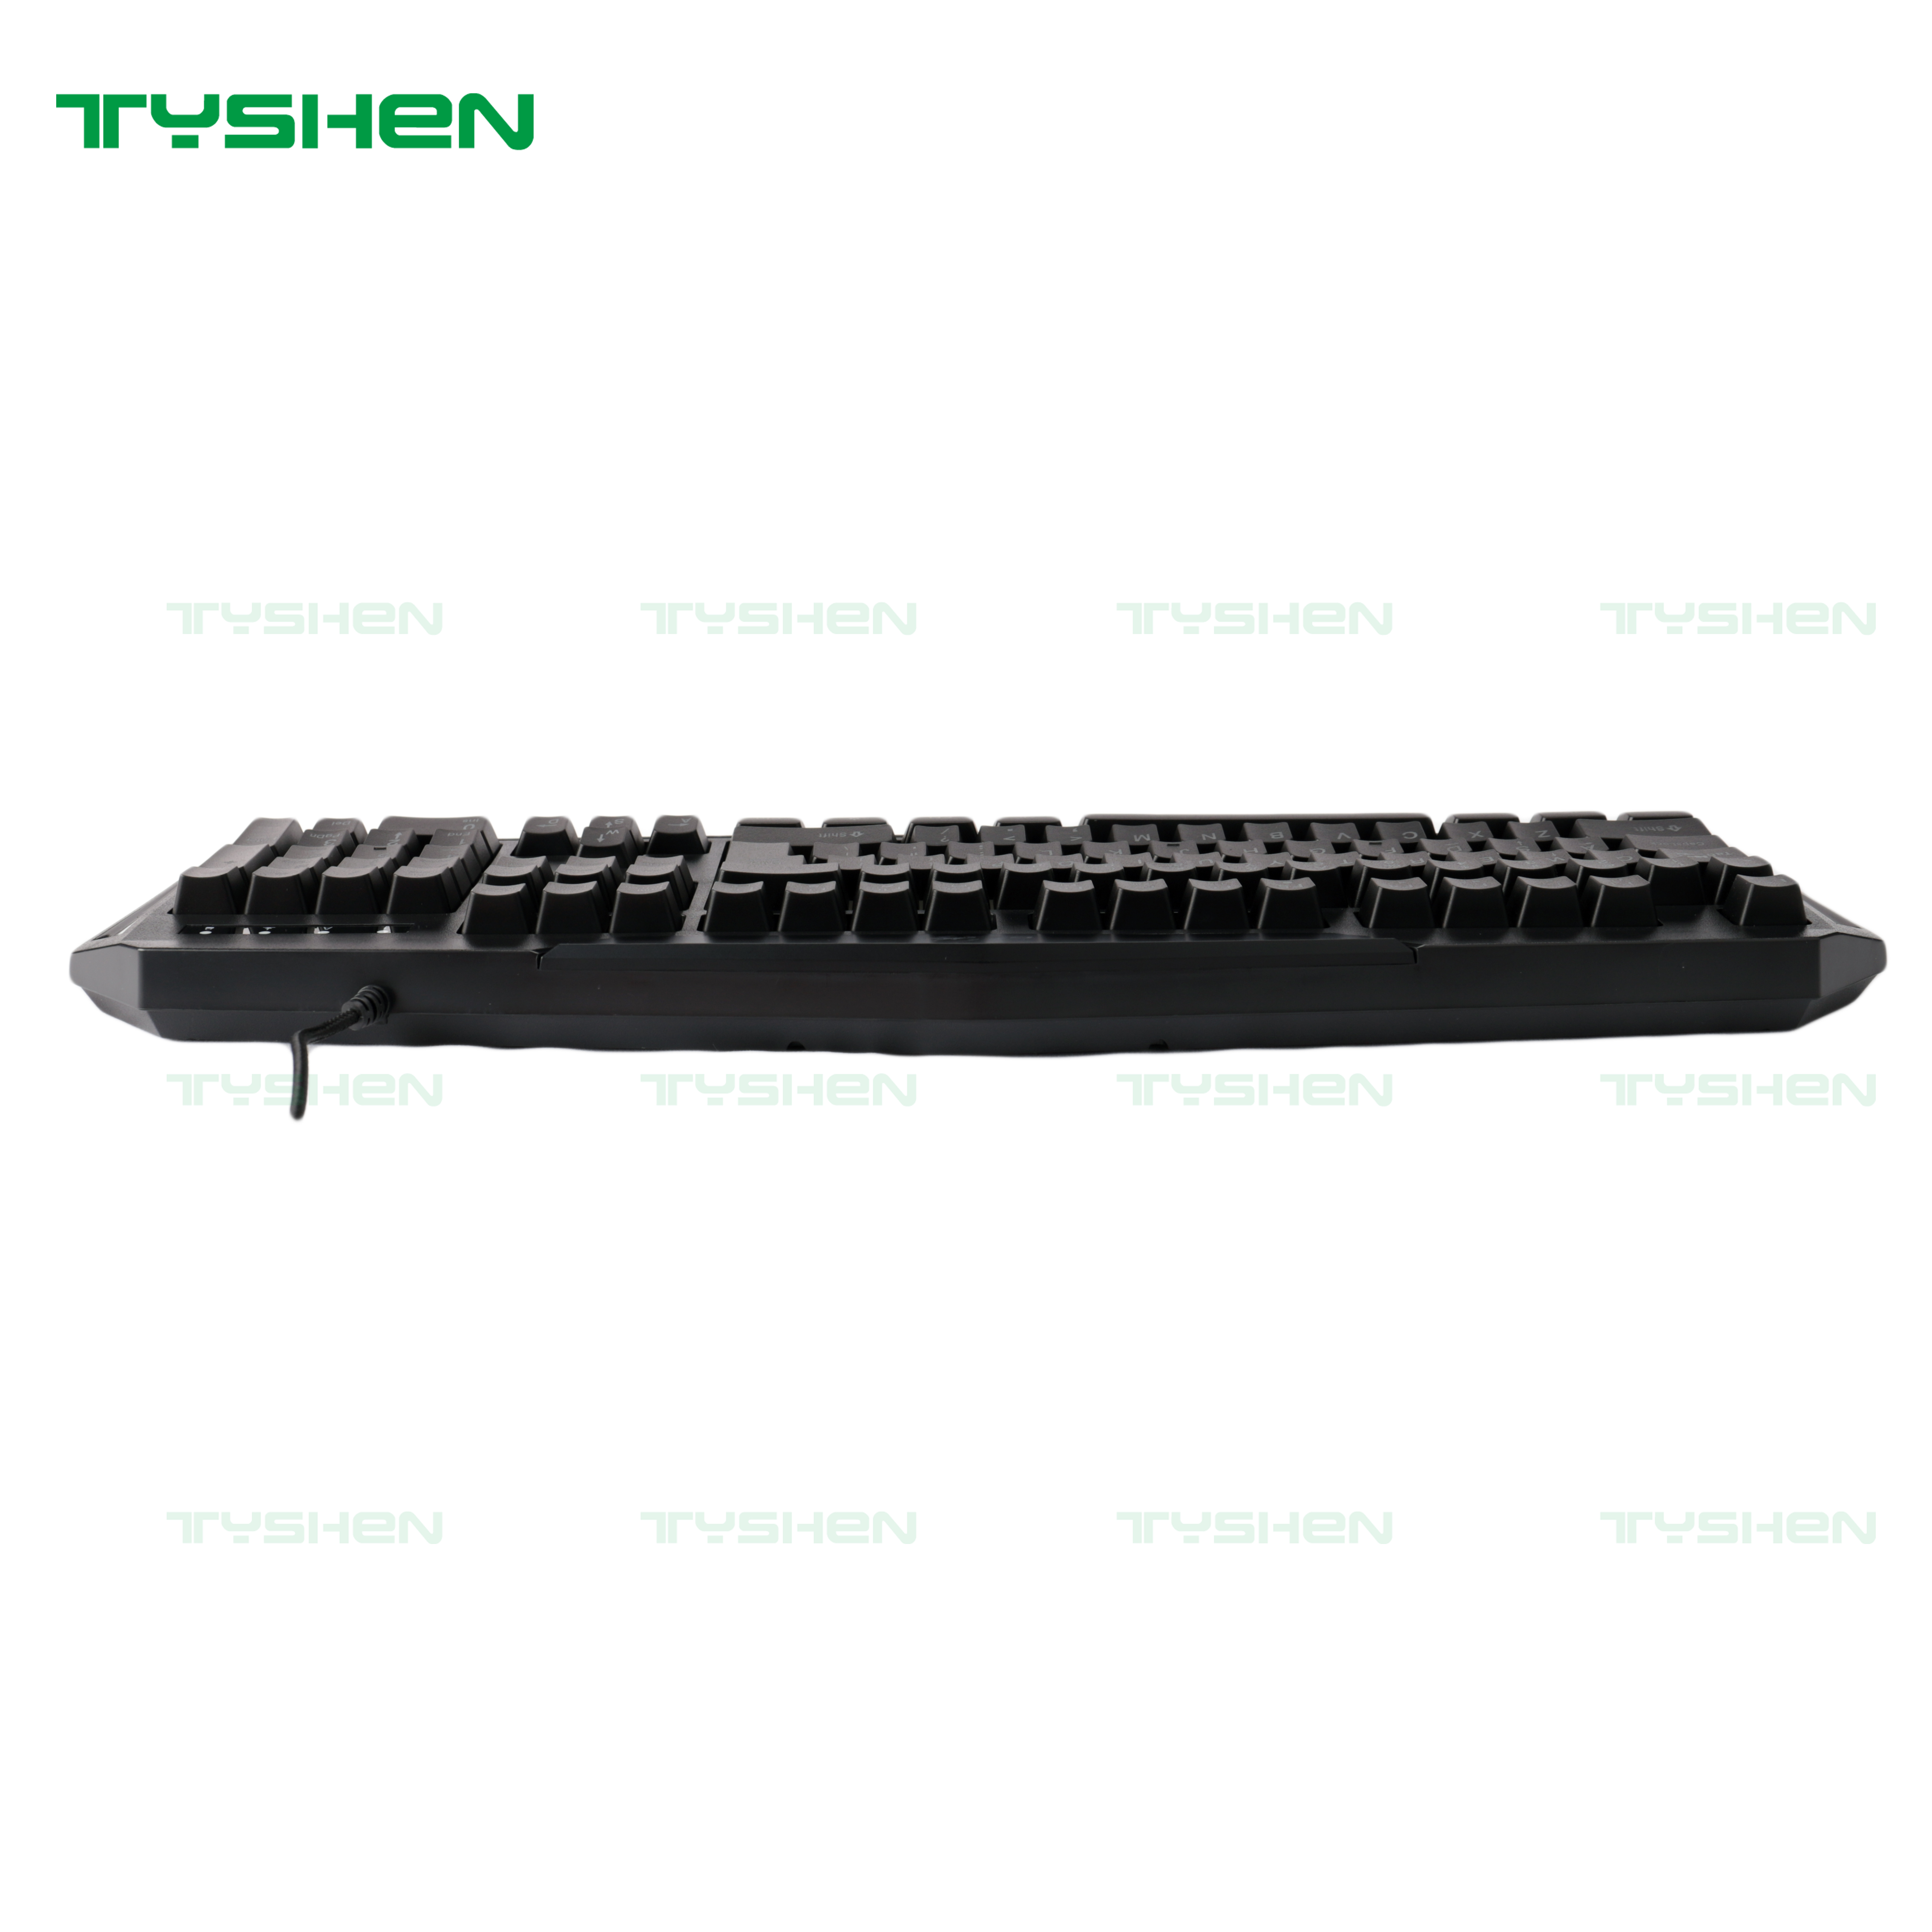 Gaming Keyboard, Gamer Keyboard for Computer, 19 Keys No Ghosting, with Win-Lock and Full-Lock, High Key Strucutre to Ensure Excellent Type Feeling